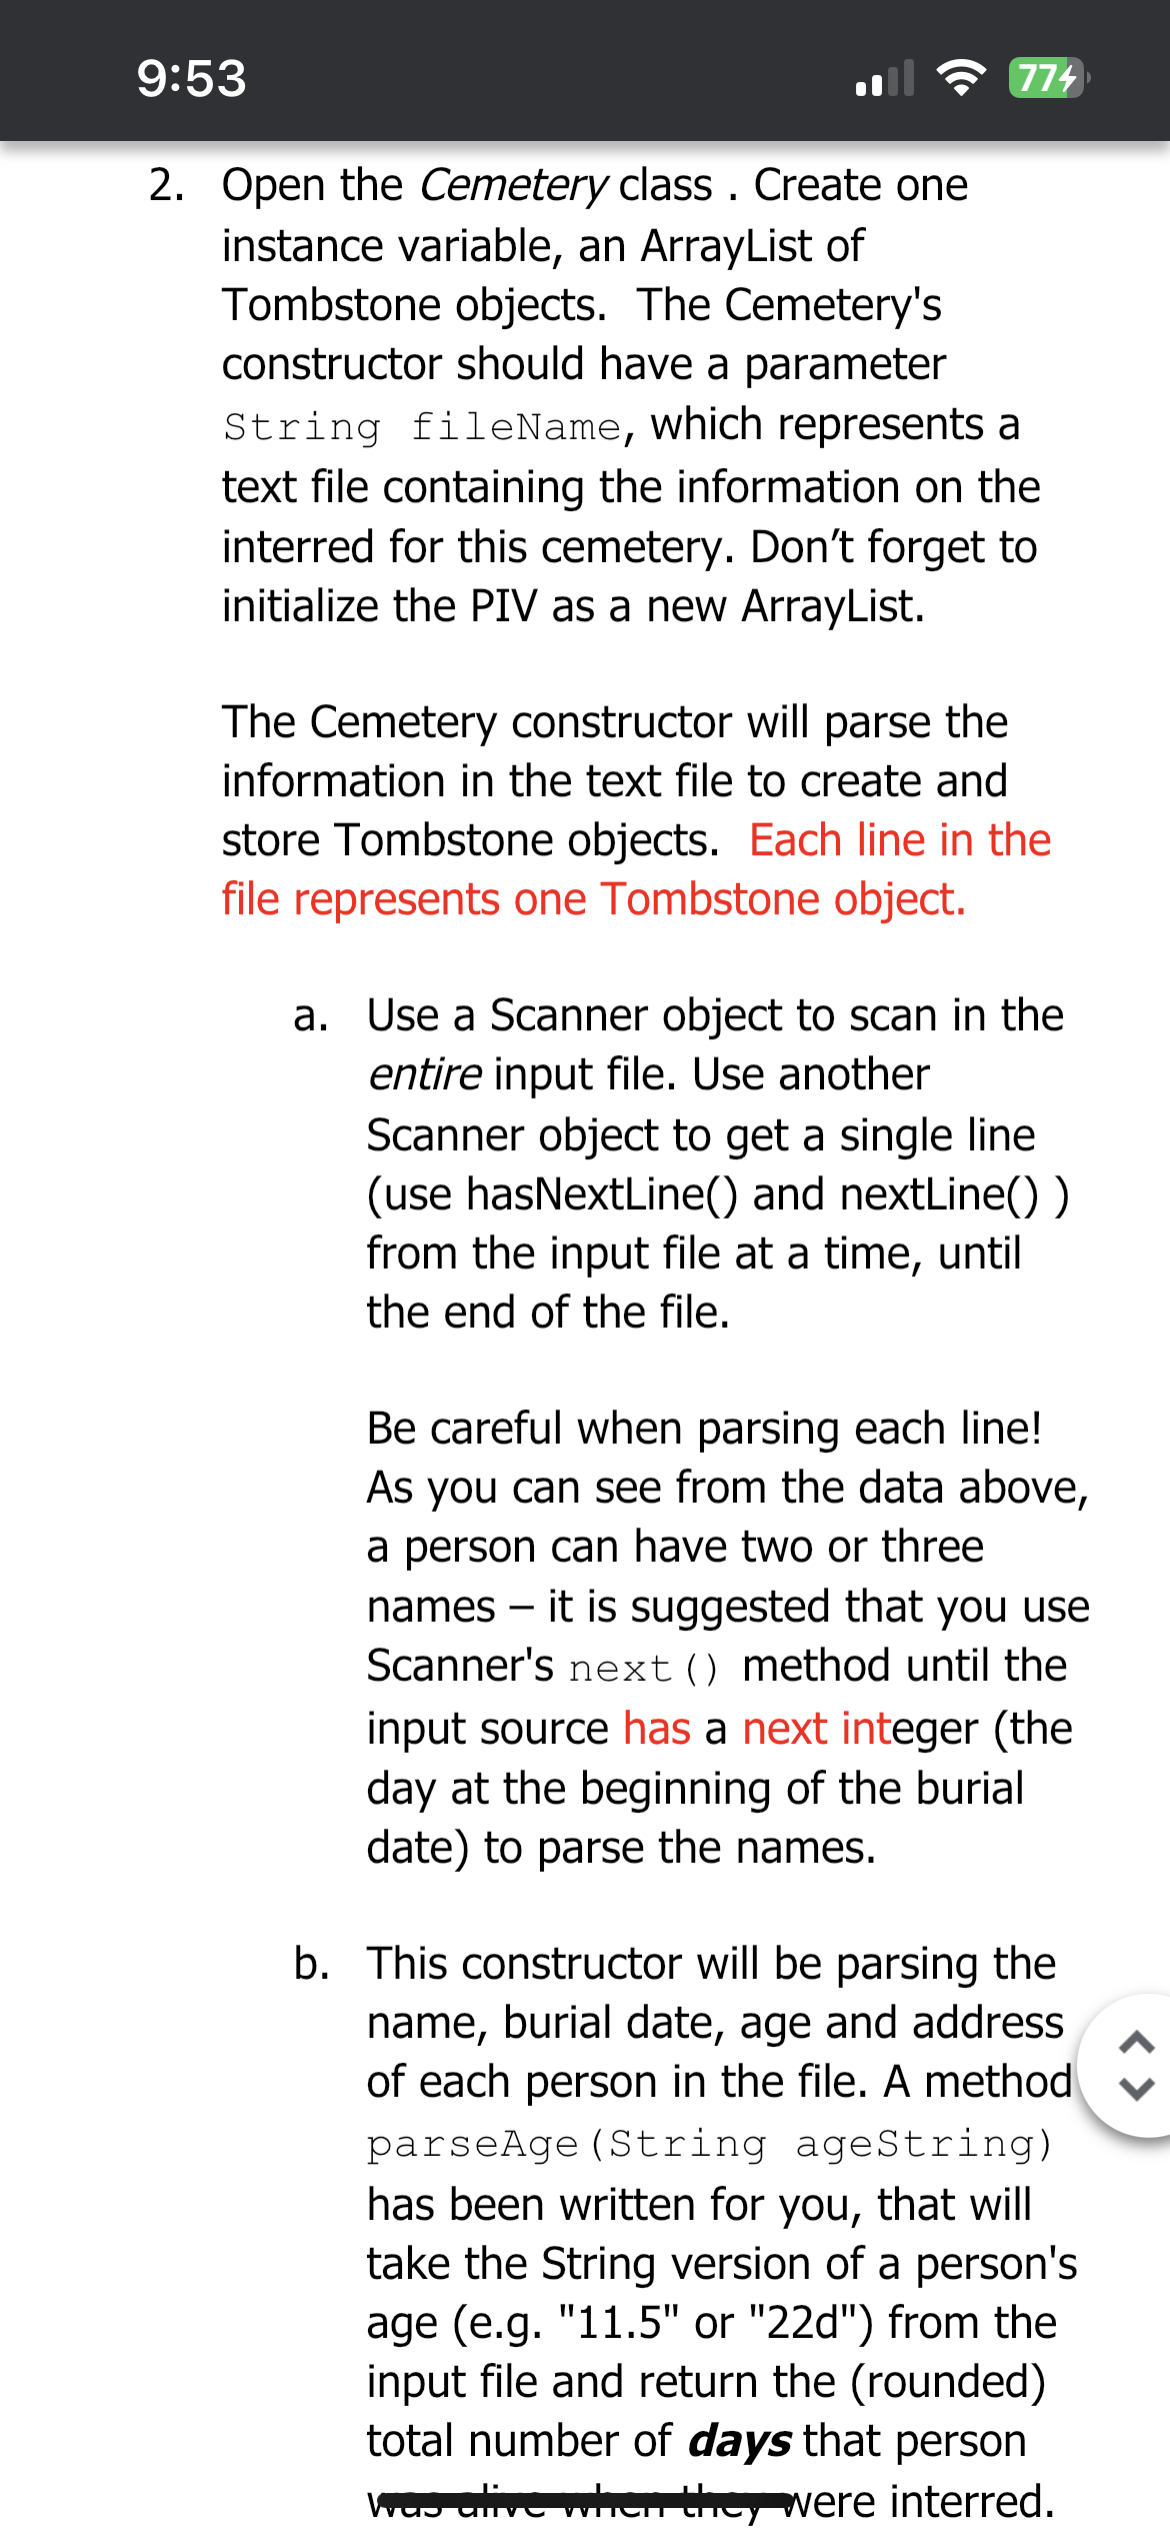 9:53
774
2. Open the Cemetery class. Create one
instance variable, an ArrayList of
Tombstone objects. The Cemetery's
constructor should have a parameter
String fileName, which represents a
text file containing the information on the
interred for this cemetery. Don't forget to
initialize the PIV as a new ArrayList.
The Cemetery constructor will parse the
information in the text file to create and
store Tombstone objects. Each line in the
file represents one Tombstone object.
a. Use a Scanner object to scan in the
entire input file. Use another
Scanner object to get a single line
(use hasNextLine() and nextLine())
from the input file at a time, until
the end of the file.
Be careful when parsing each line!
As you can see from the data above,
a person can have two or three
names - it is suggested that you use
Scanner's next () method until the
input source has a next integer (the
day at the beginning of the burial
date) to parse the names.
b. This constructor will be parsing the
name, burial date, age and address
of each person in the file. A method
parseAge (String ageString)
has been written for you, that will
take the String version of a person's
age (e.g. "11.5" or "22d") from the
input file and return the (rounded)
total number of days that person
was alive when they were interred.